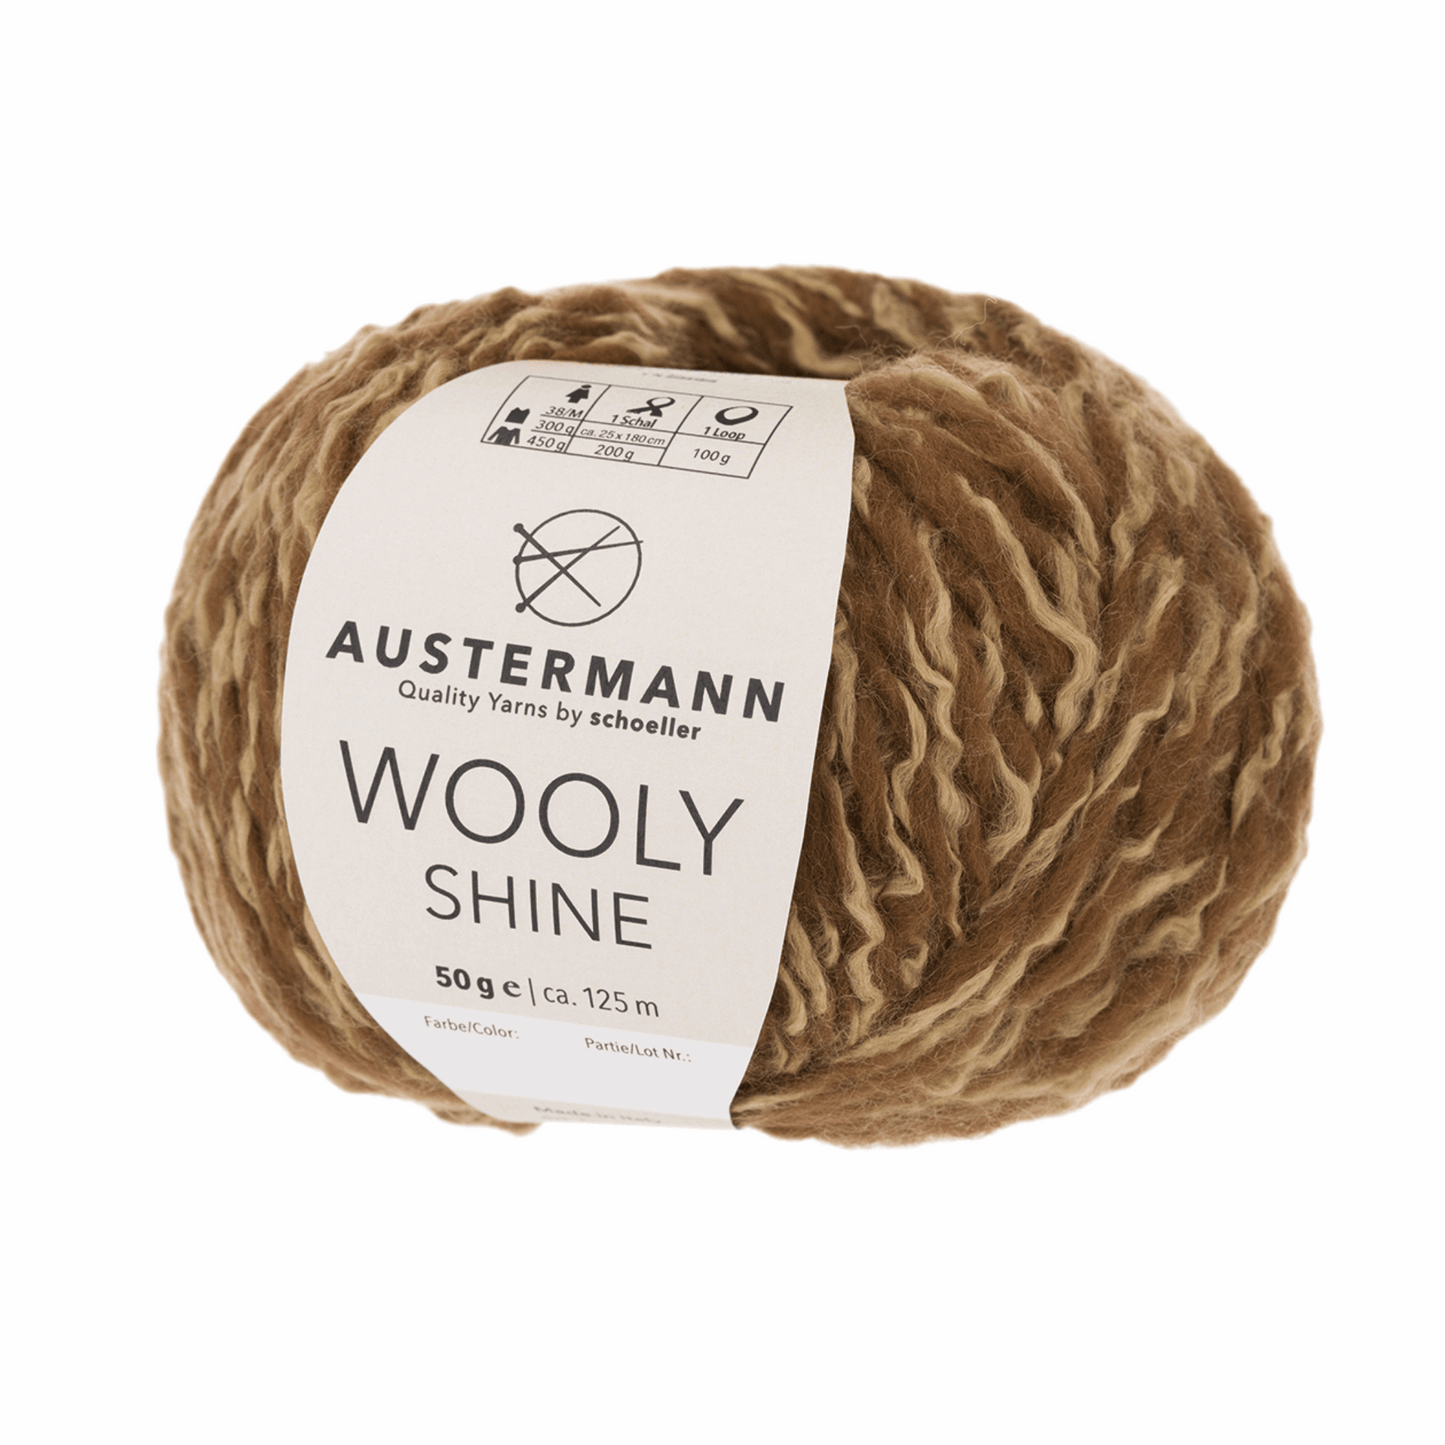 Wooly Shine 50g, 90351, Farbe 2, cognac